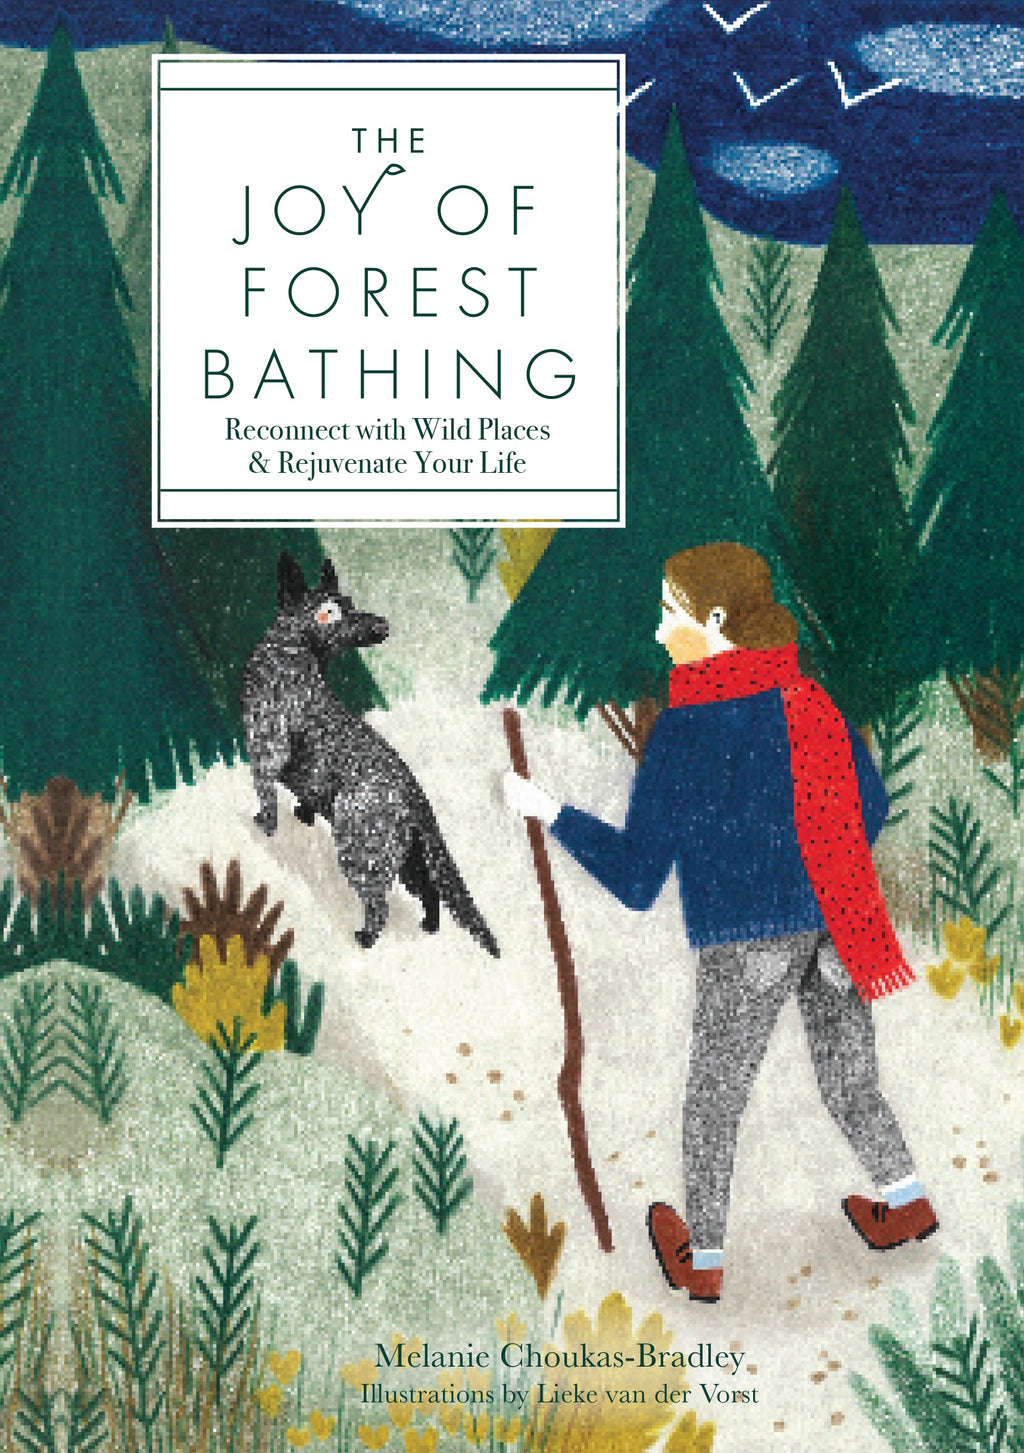 The Joy of Forest Bathing